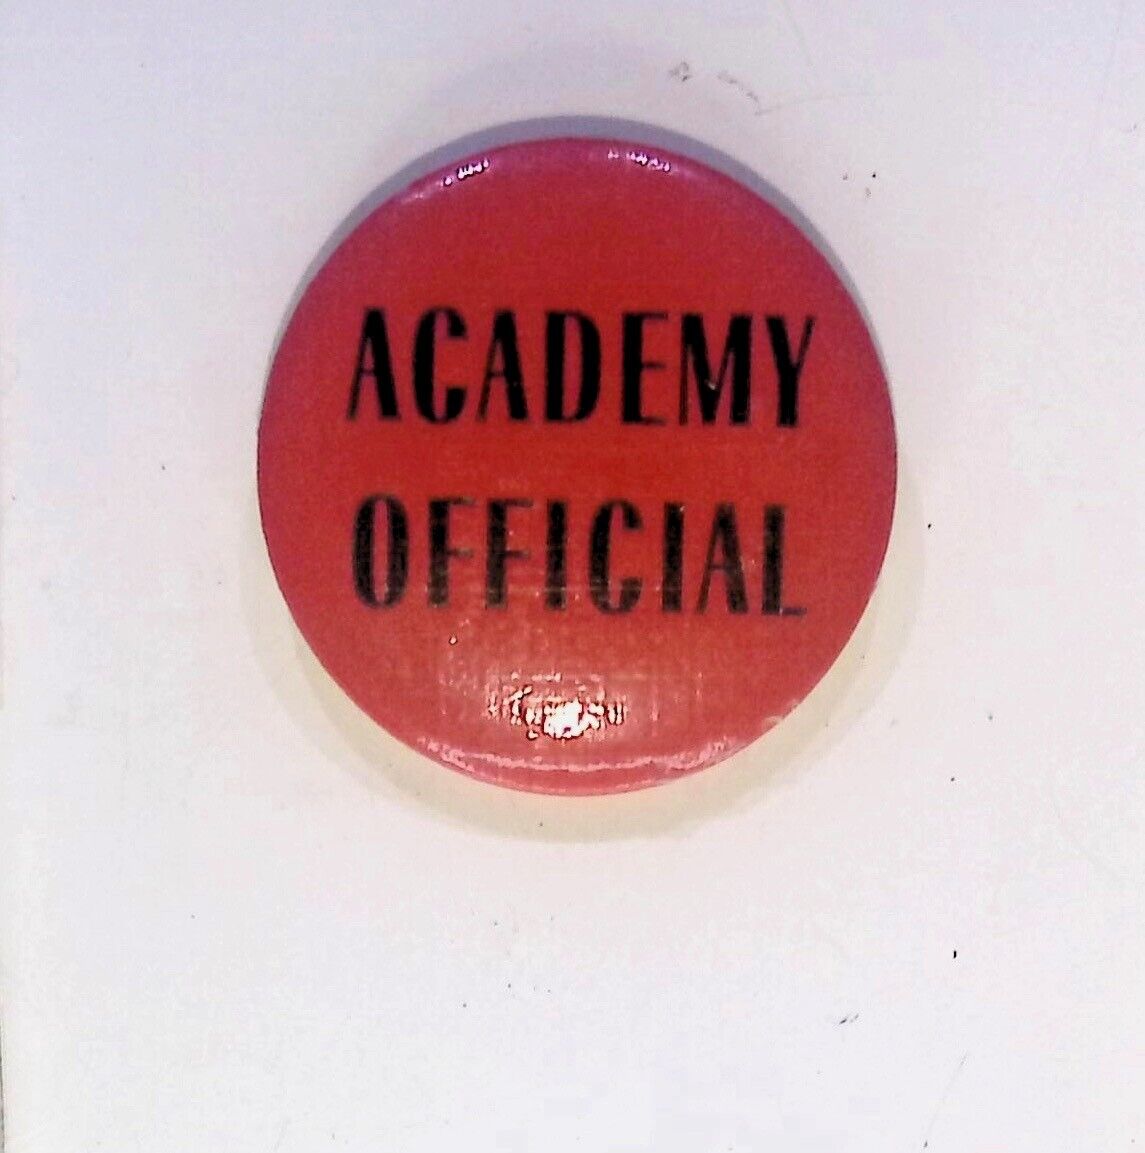 ACADEMY OFFICIAL HOLLYWOOD VINTAGE BUTTON PIN ADVERTISING